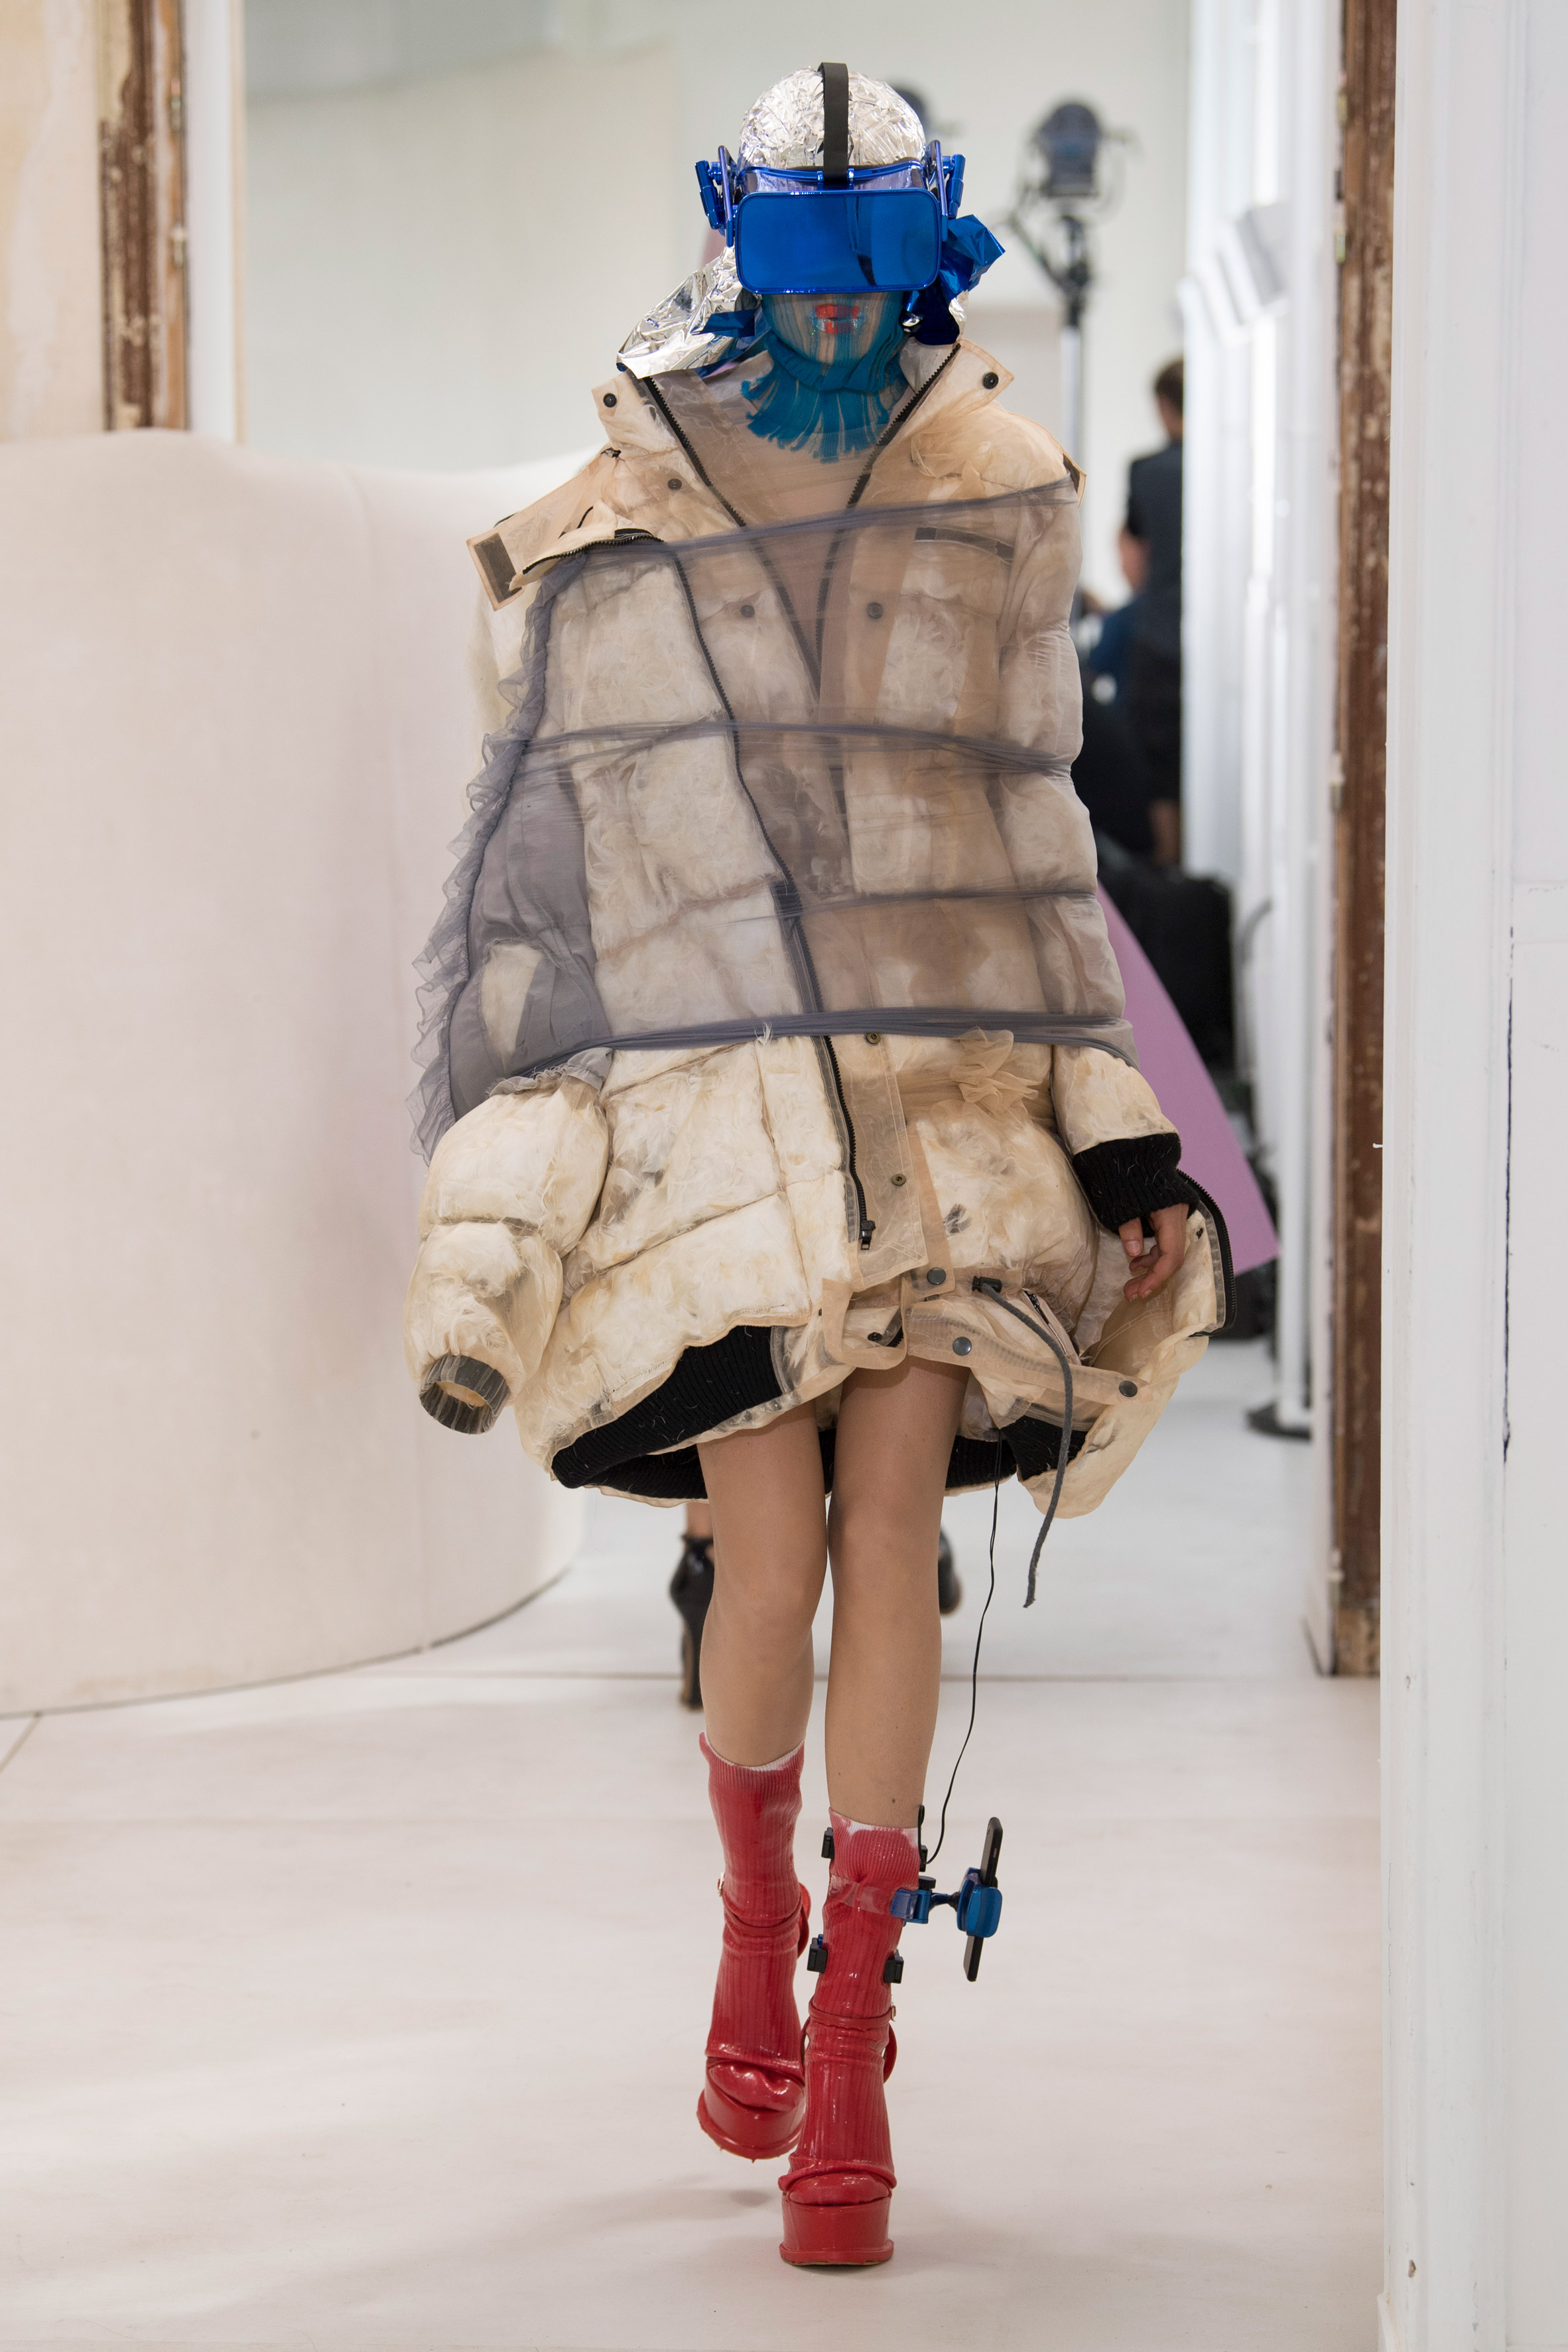 Maison Margiela's Artisanal couture collection is designed for